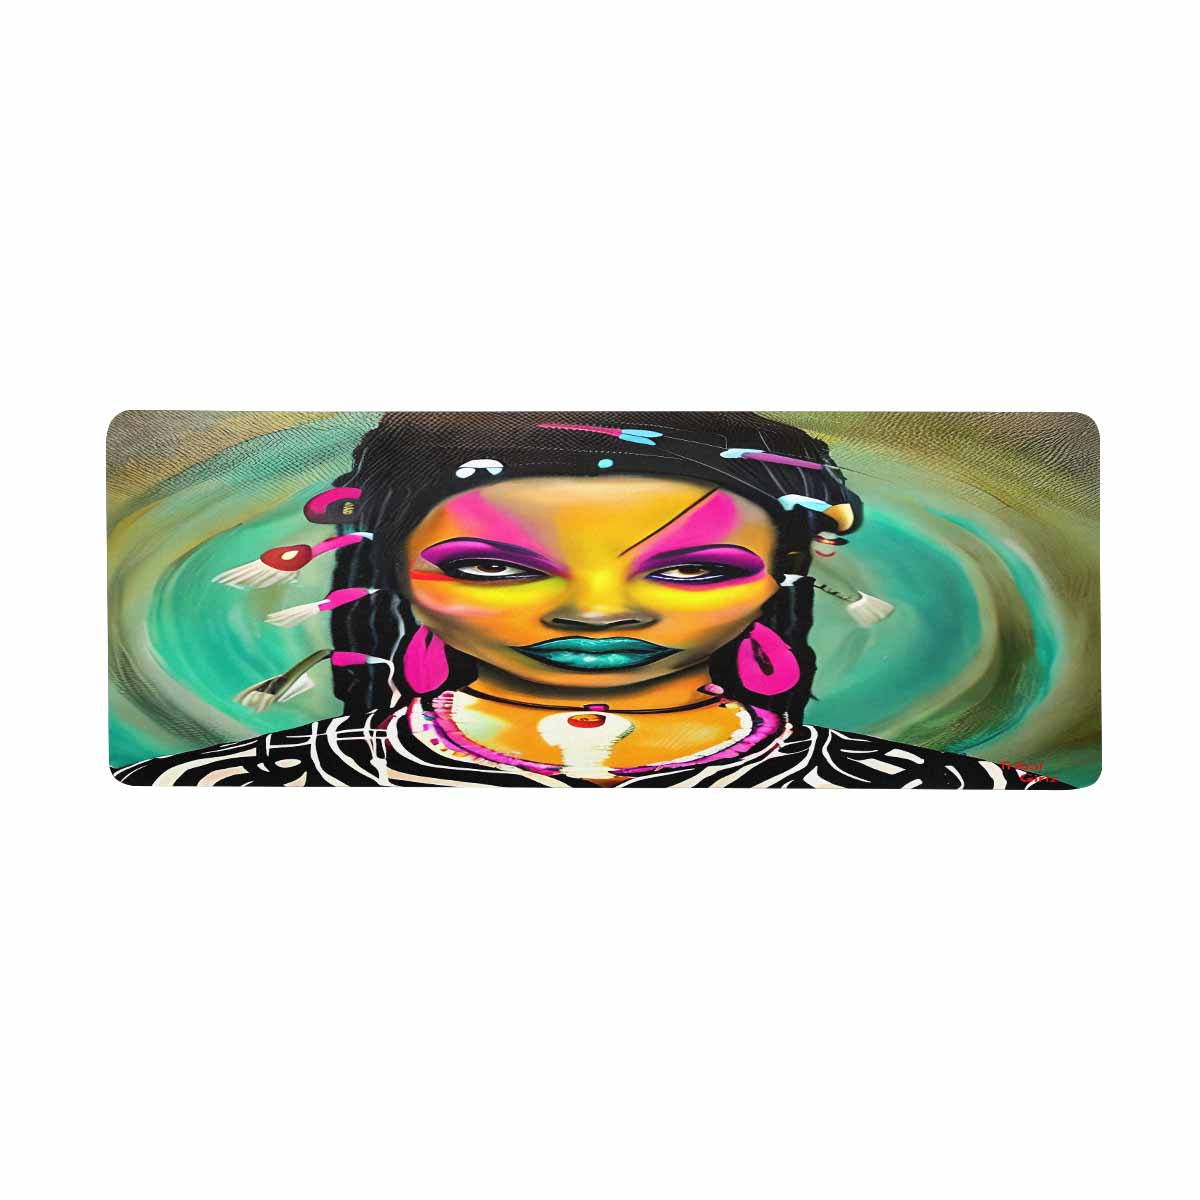 Dreads & Braids, 31 x 12 in large mouse pad, Fulangiara 33